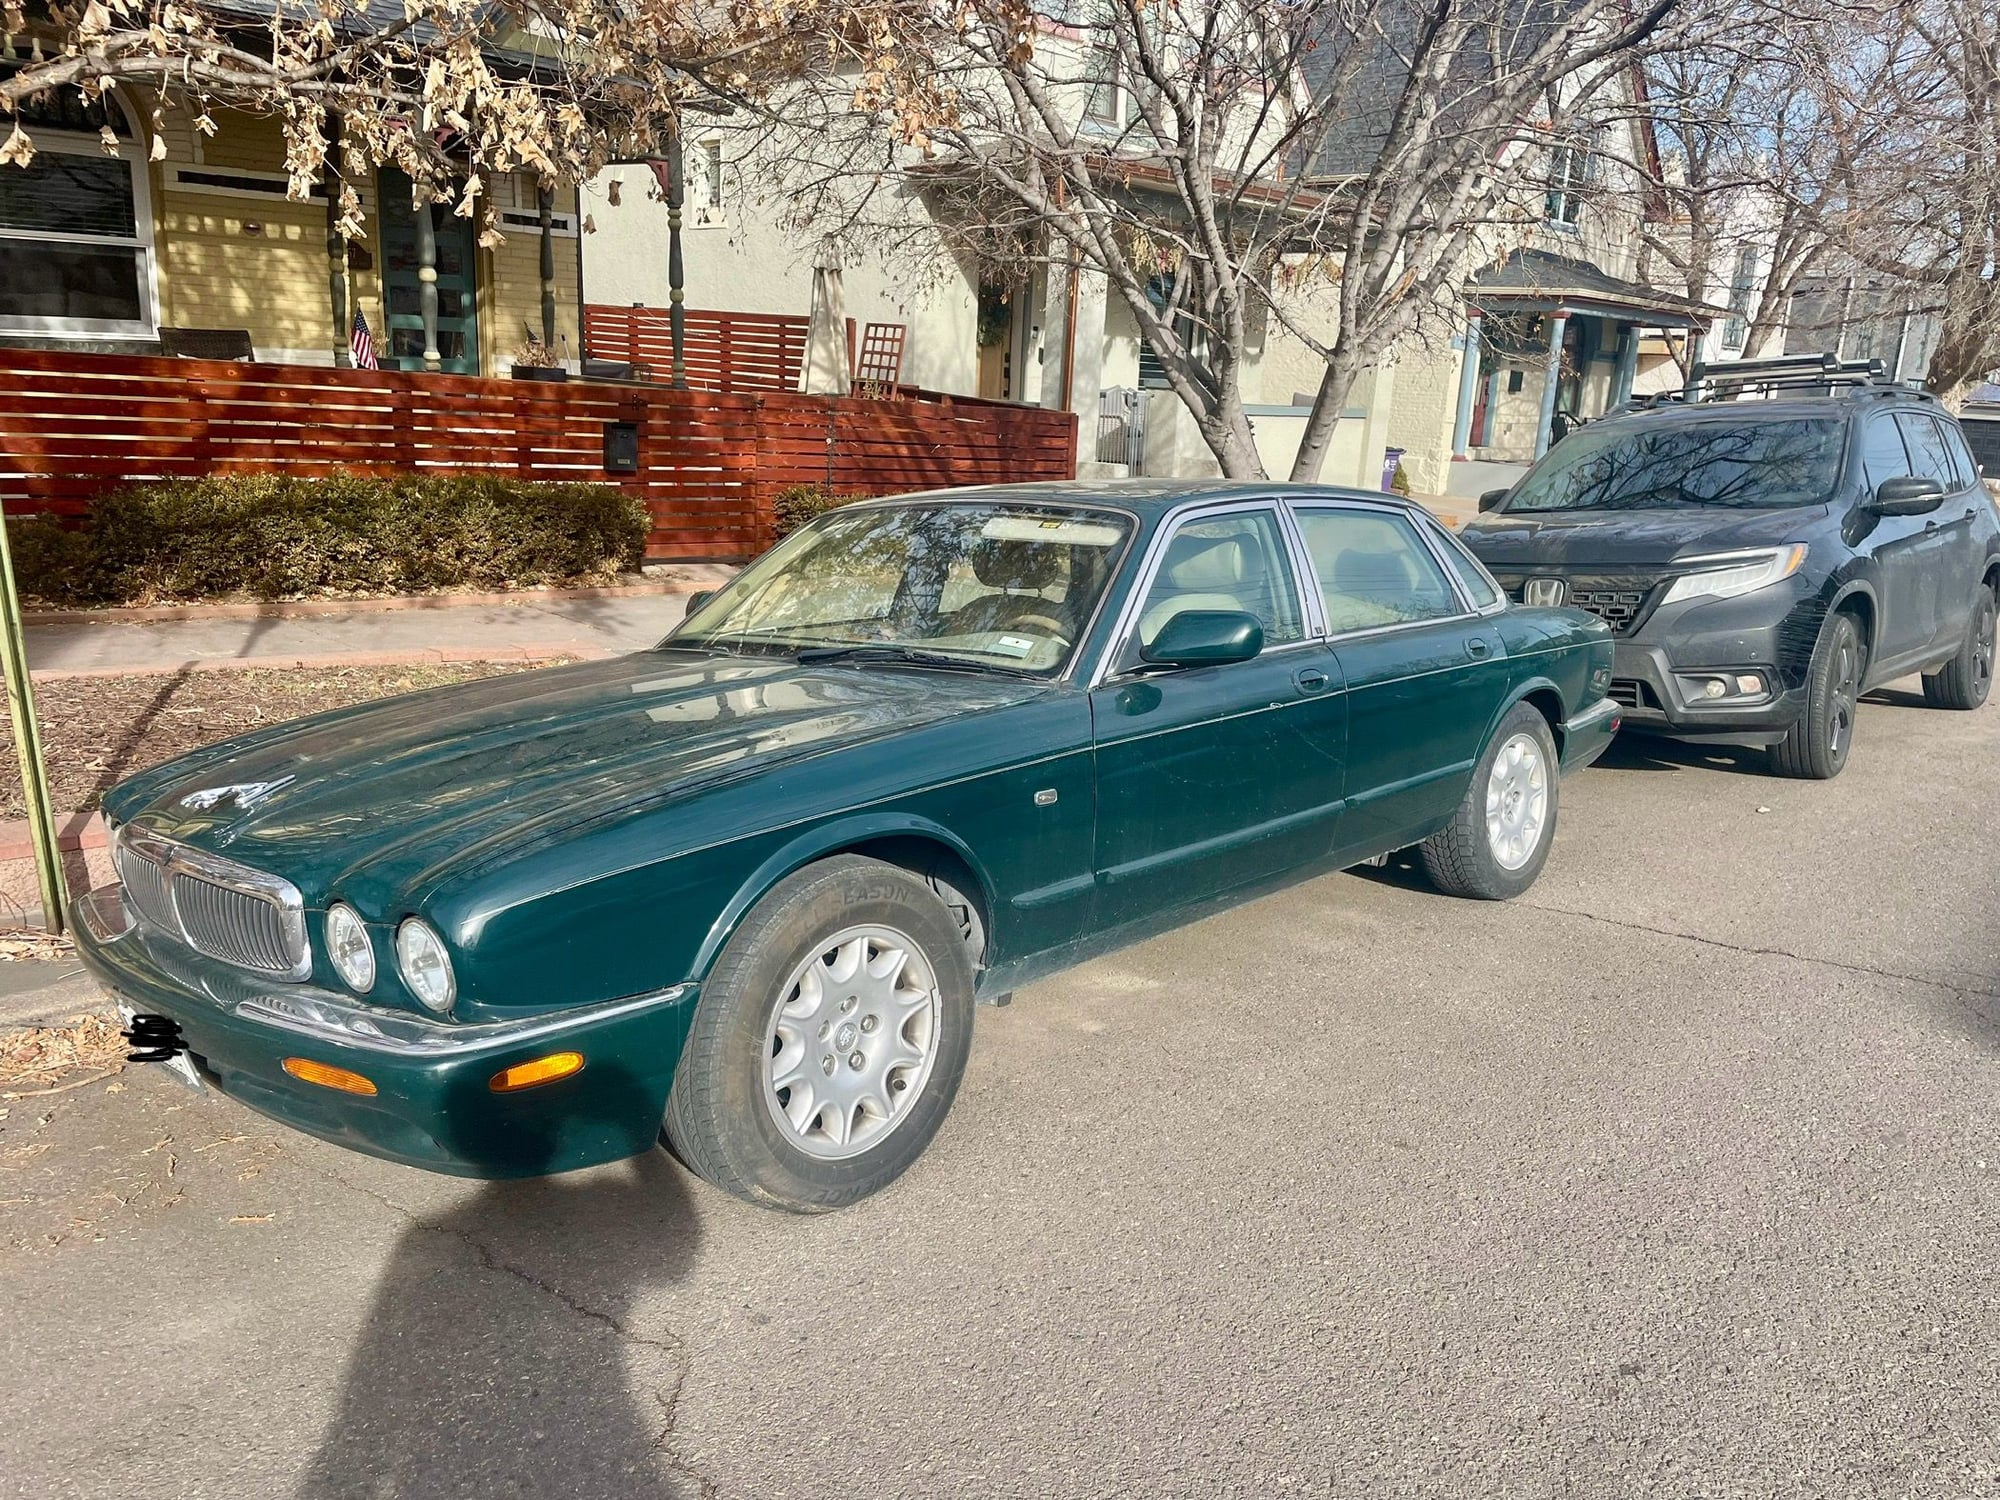 2002 Jaguar XJ8 - 2002 Green XJ8 Rebuilt computer installed 2023. Been stored so needs some tlc. Smooth - Used - VIN SAJDA14C42LF47769 - 110,500 Miles - 8 cyl - 2WD - Automatic - Sedan - Denver, CO 80211, United States